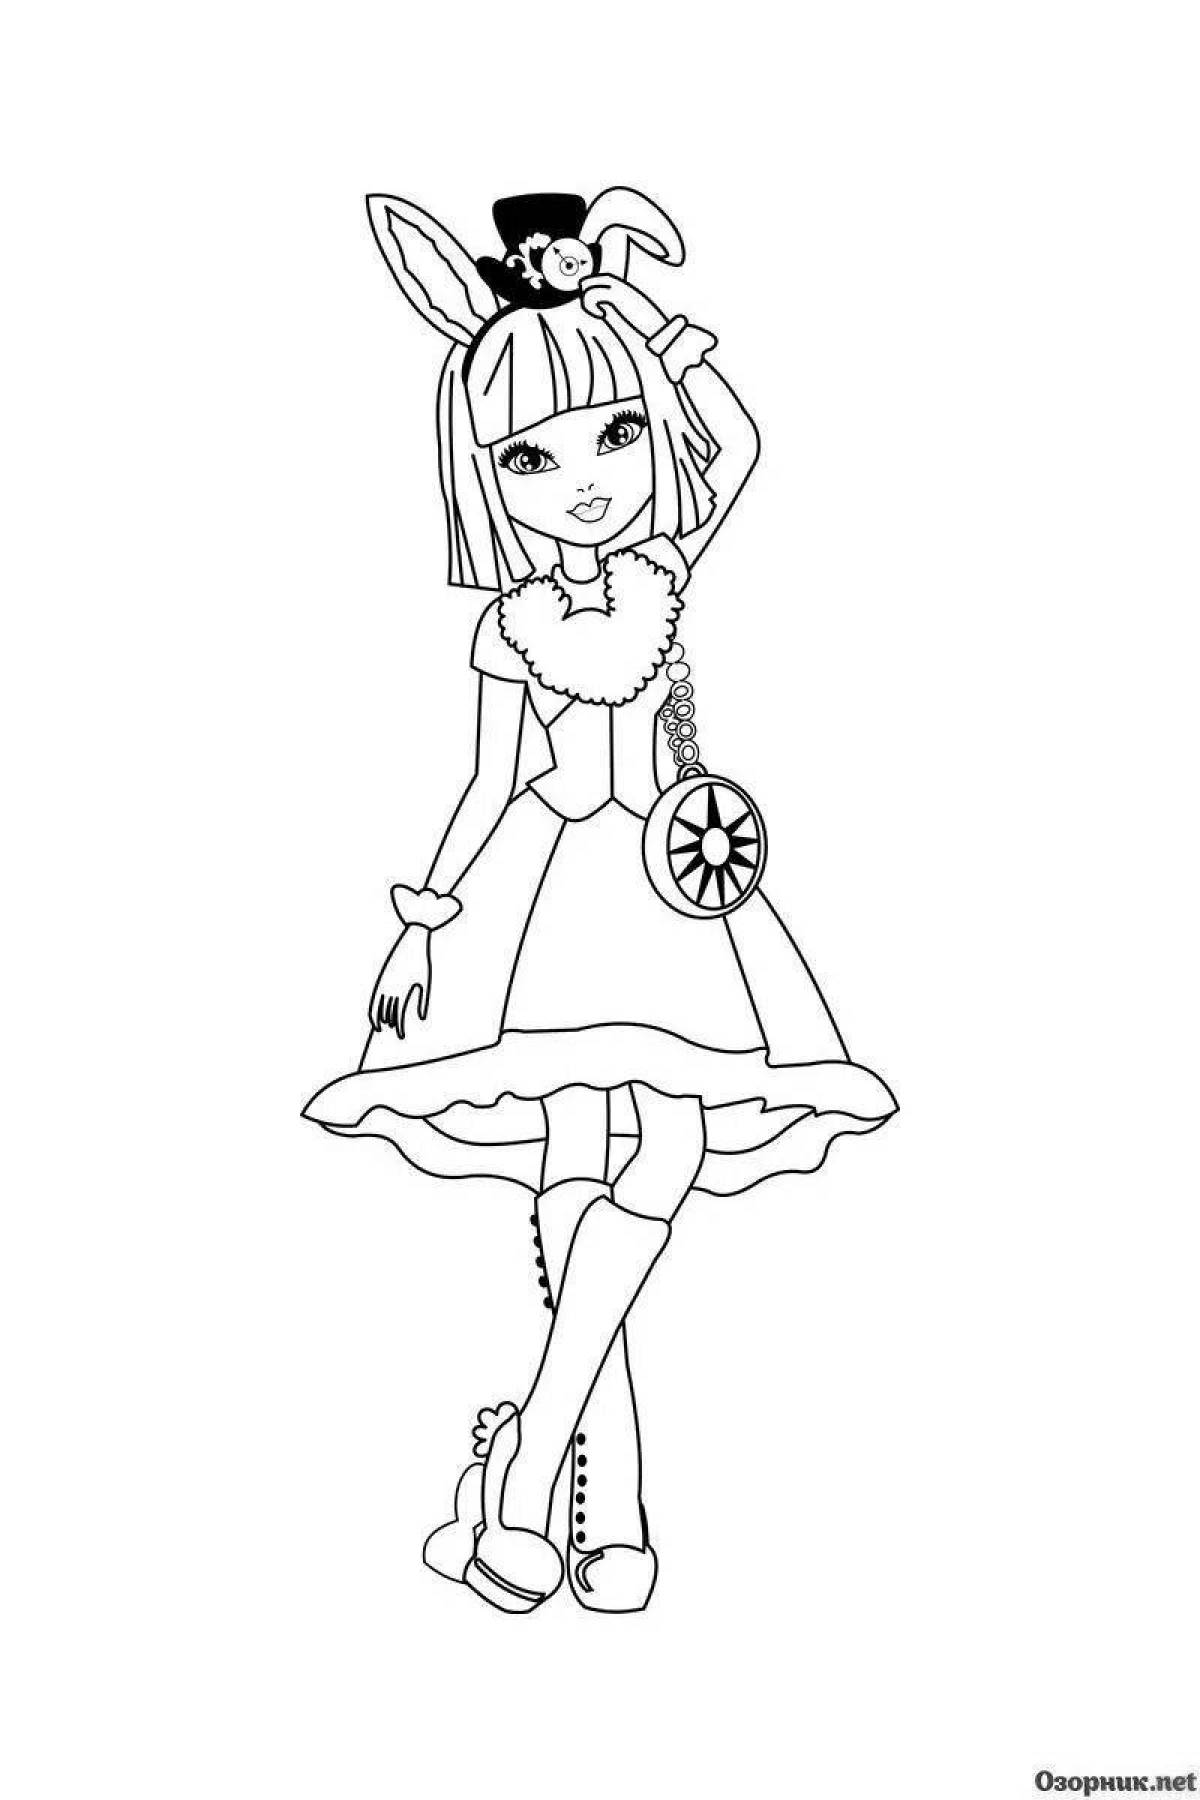 Coloring page playful poppy doll